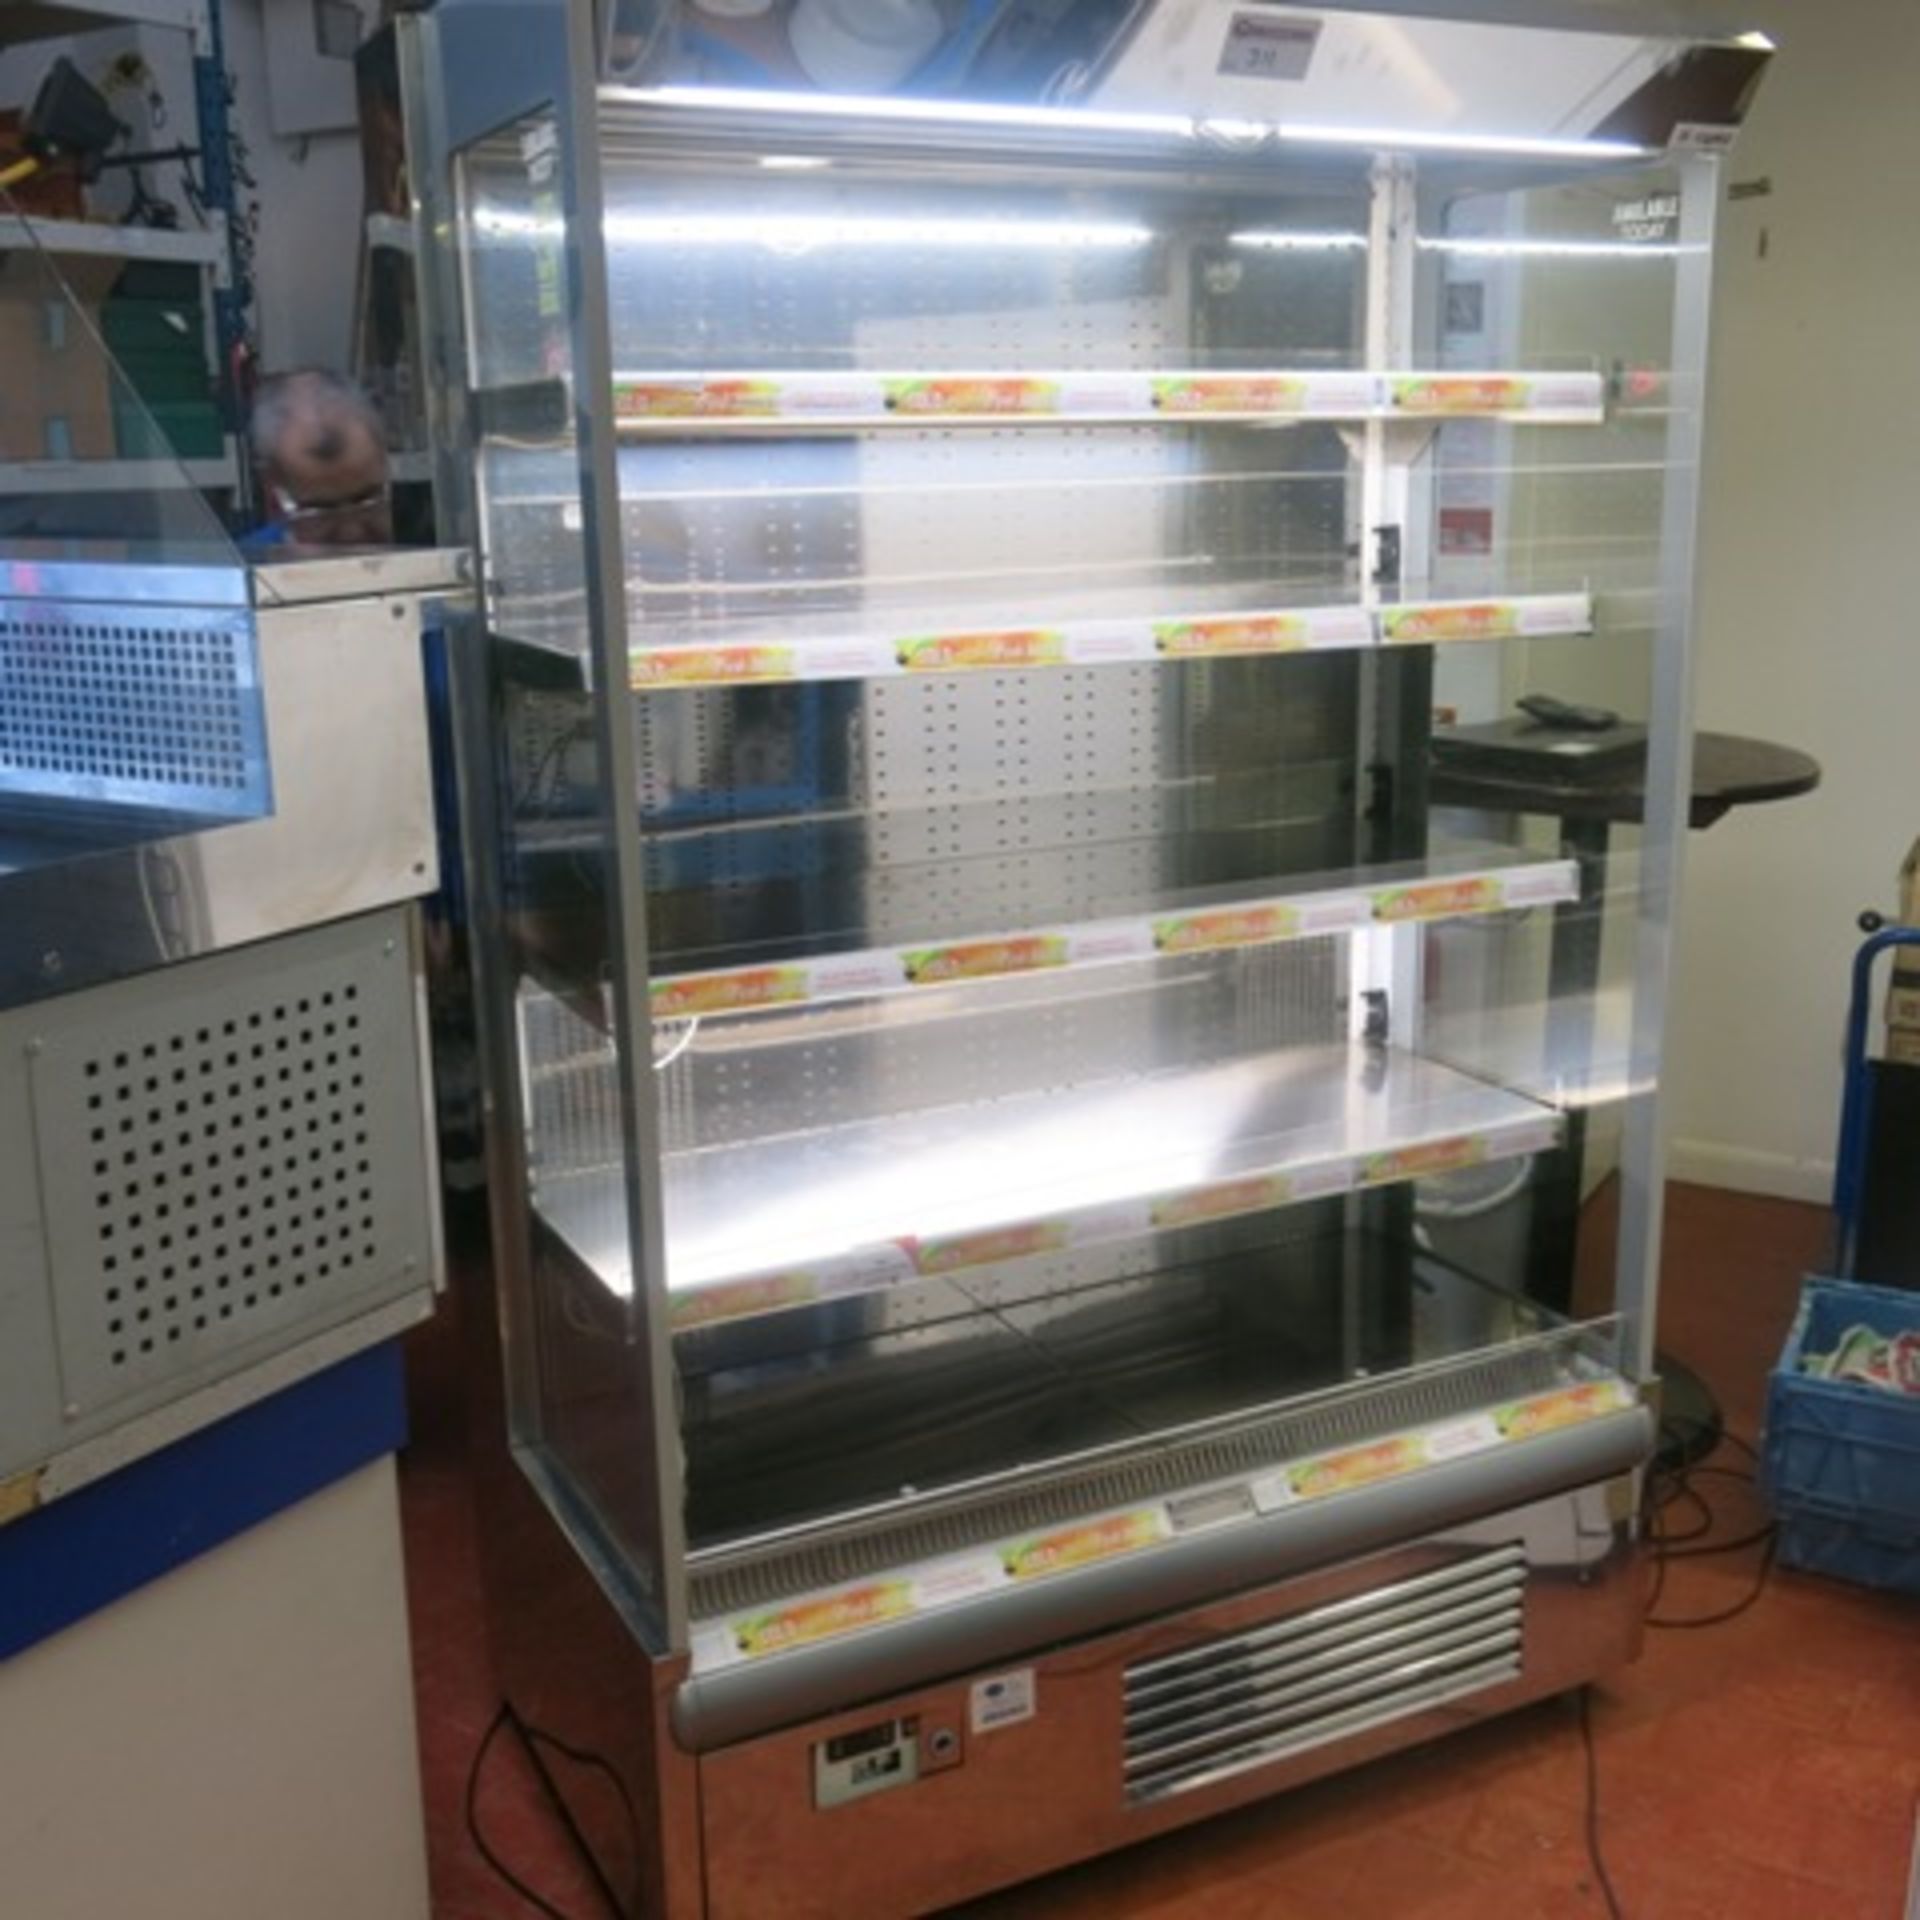 Capital Products Multideck Refrigerated Self Serve Stainless Steel Display Unit. Model Galaxy-SS-14. - Image 4 of 7